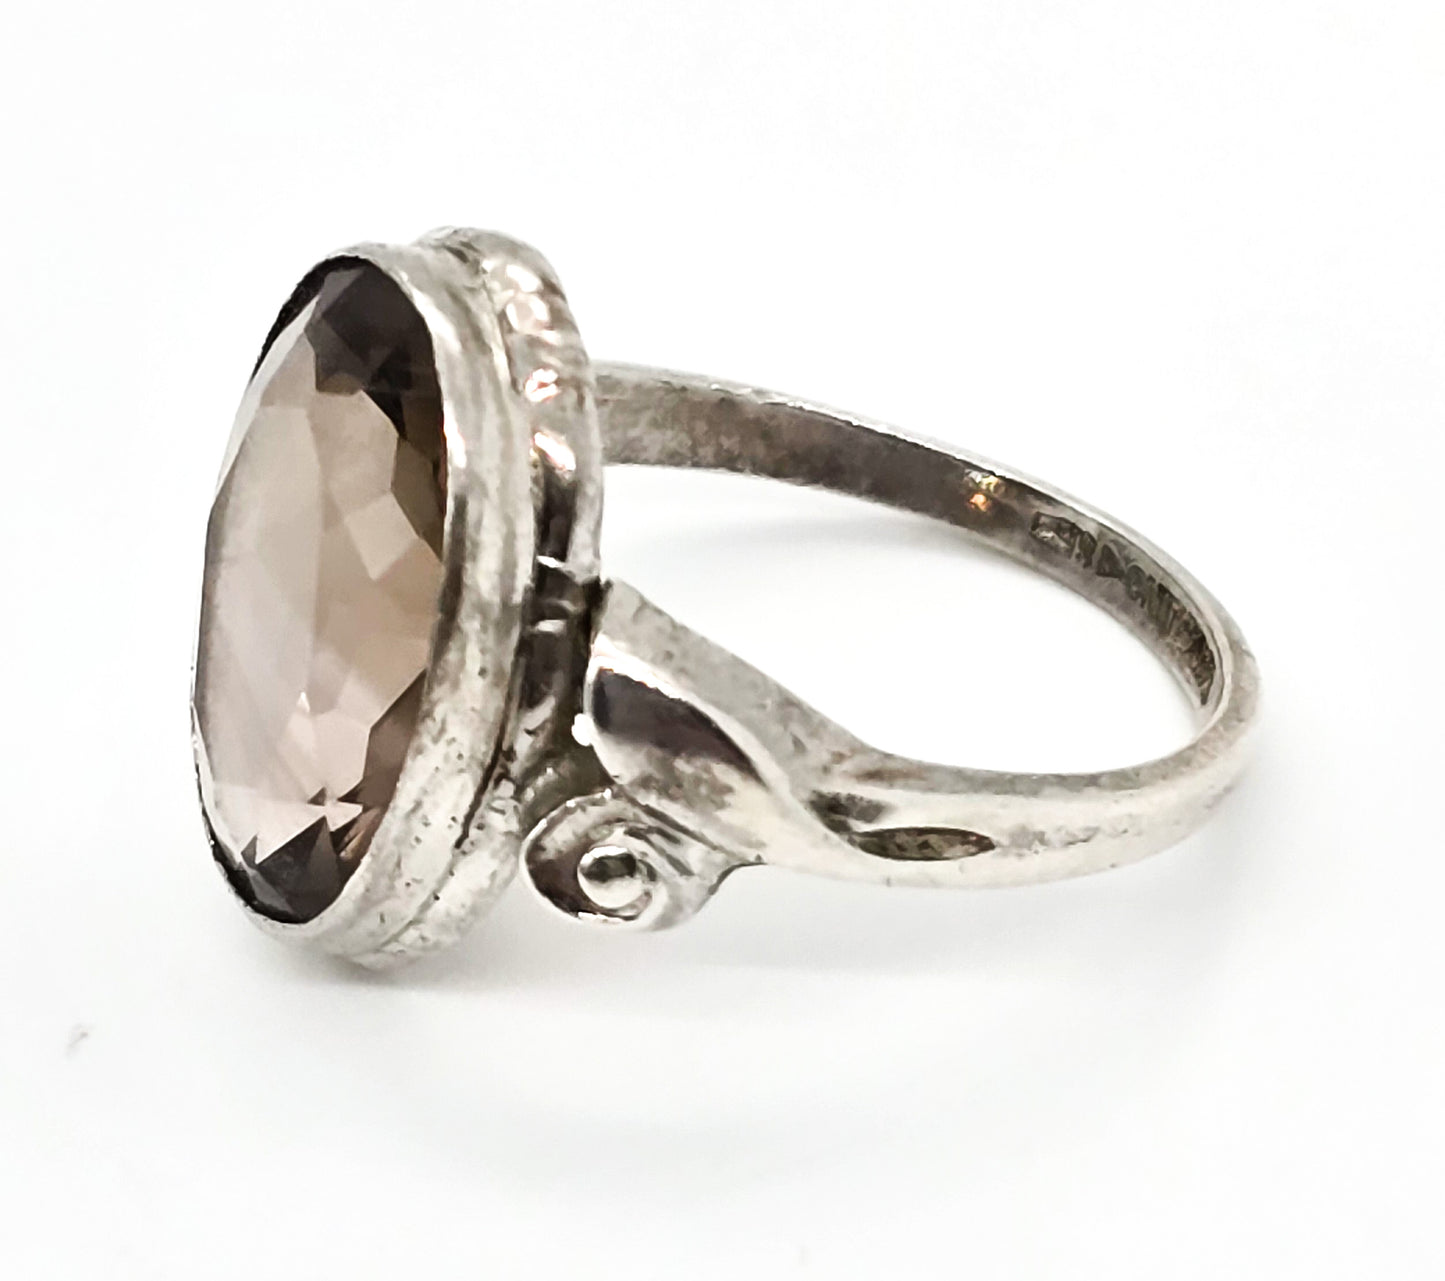 Clark and Coombs Smoky Quartz antique Art Deco sterling silver ring size 7.5